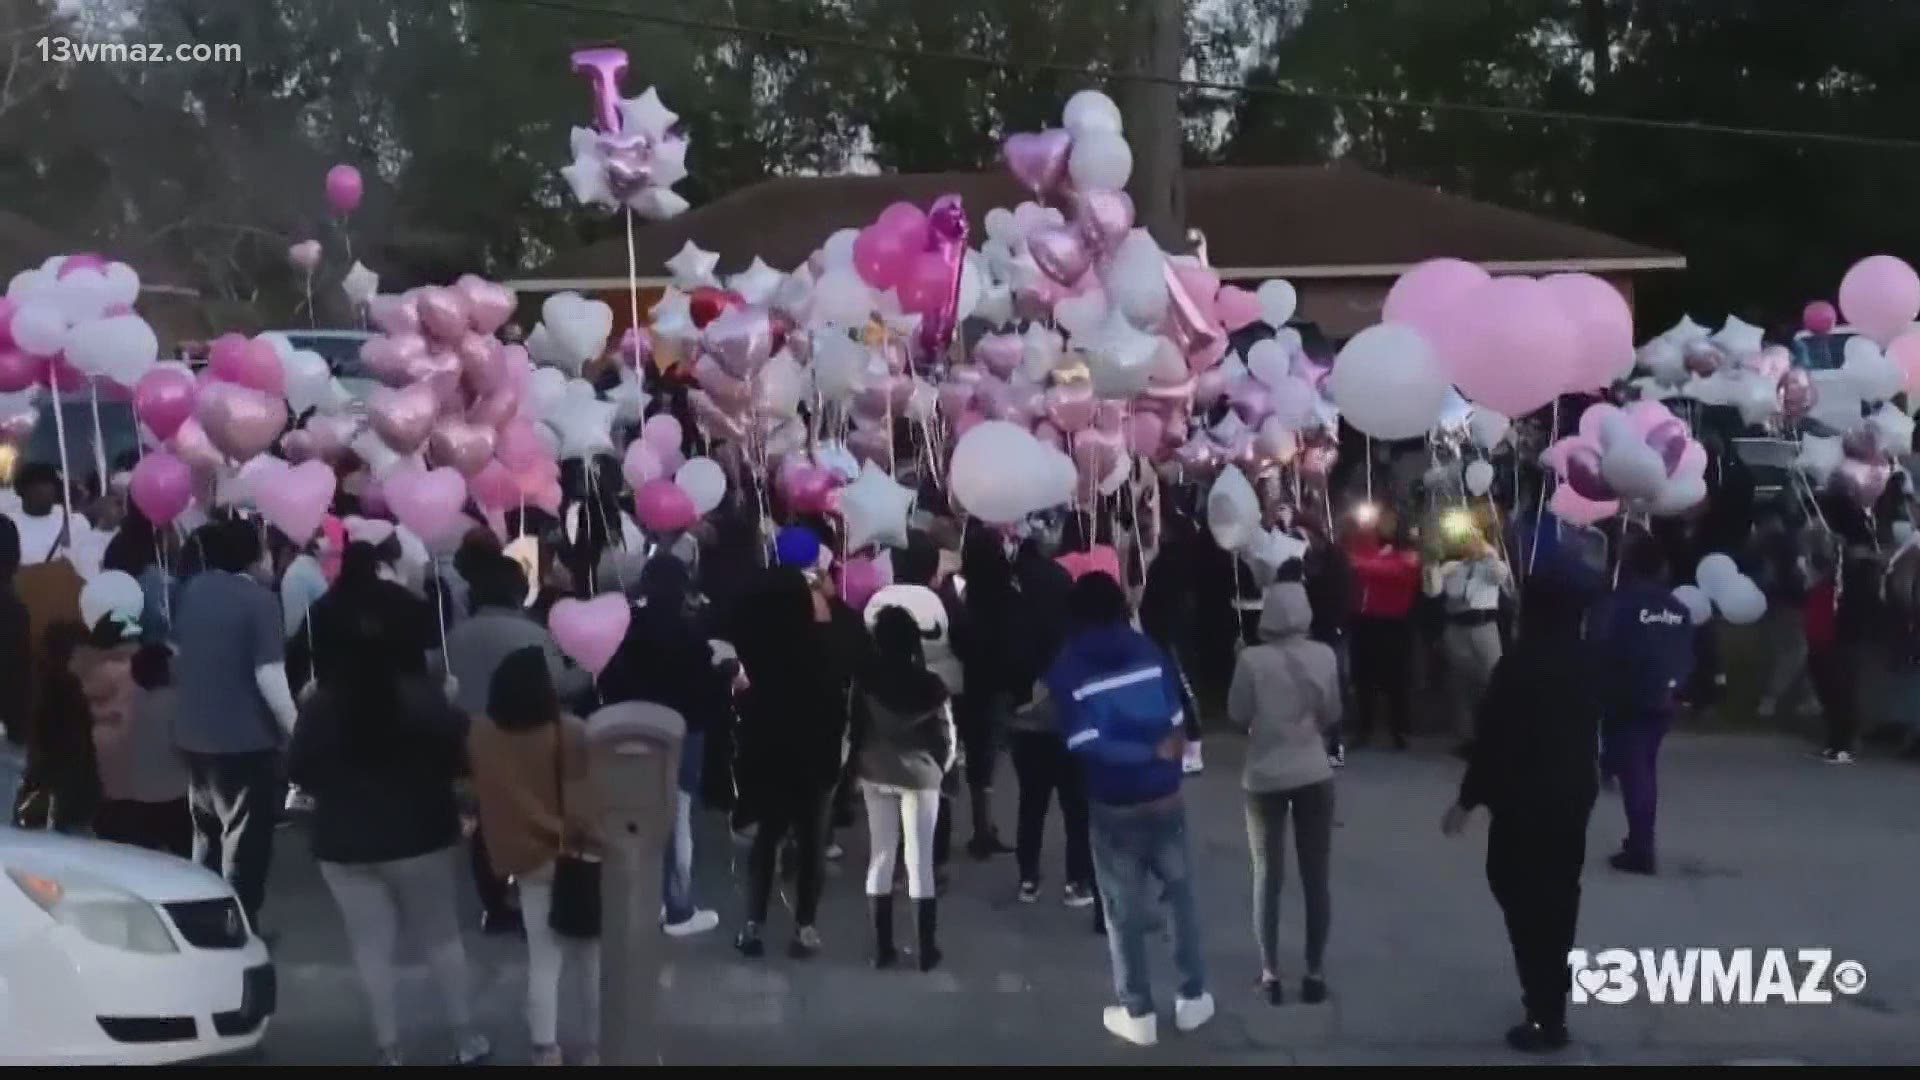 More than 100 people gathered to show their support for 22-year-old Jhacaya Mann and her family.